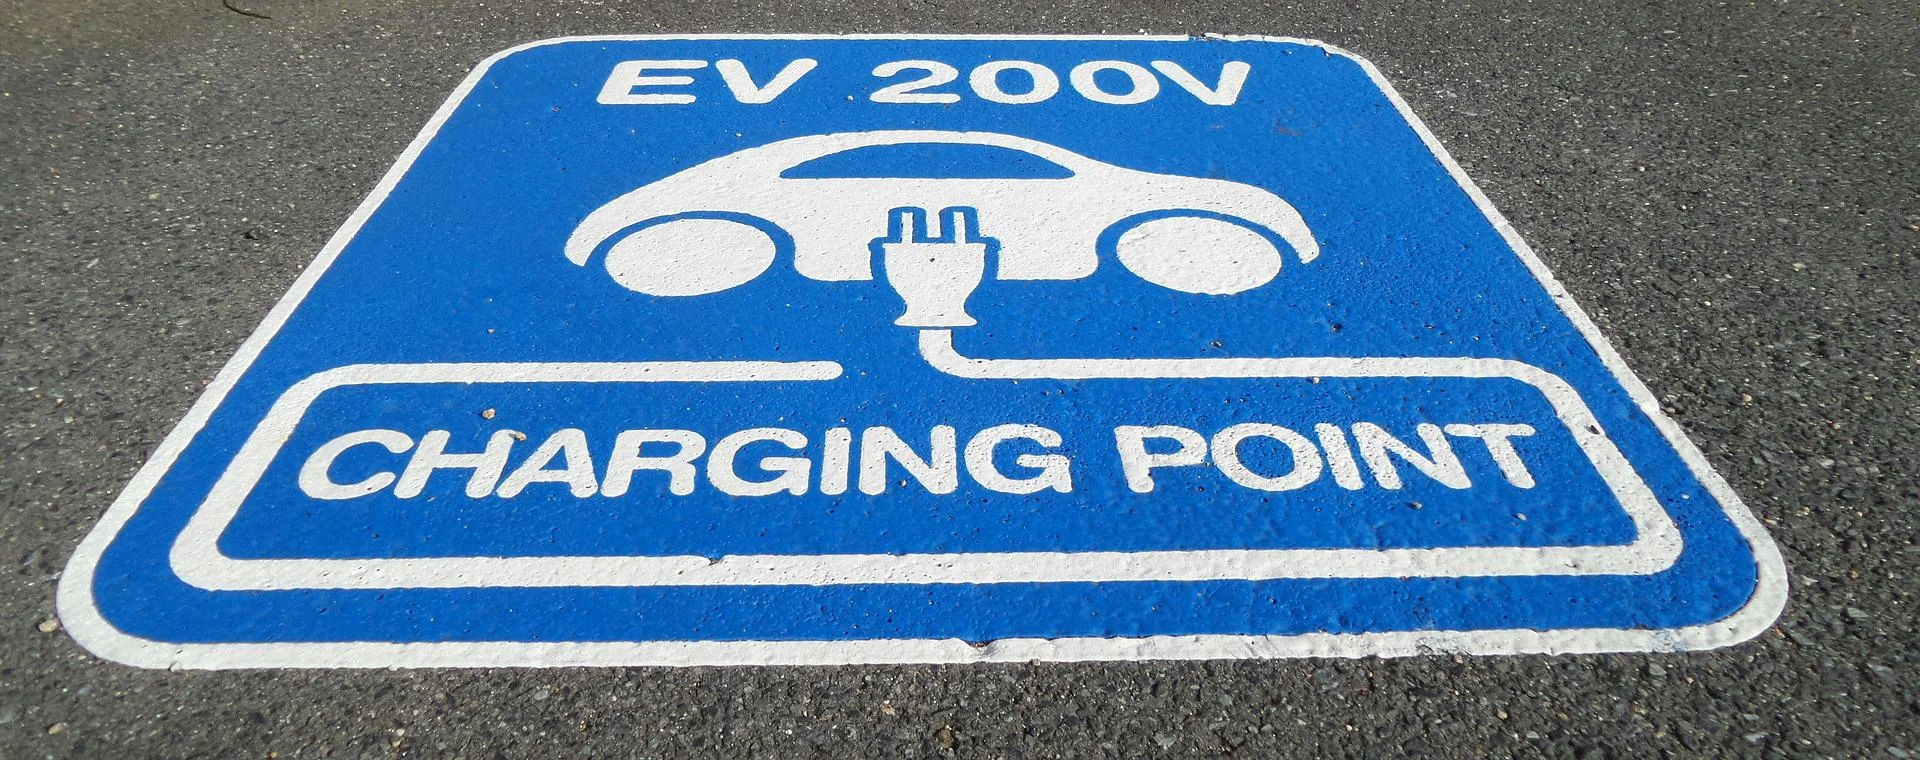 Best Credit Cards for Electric Vehicle Charging